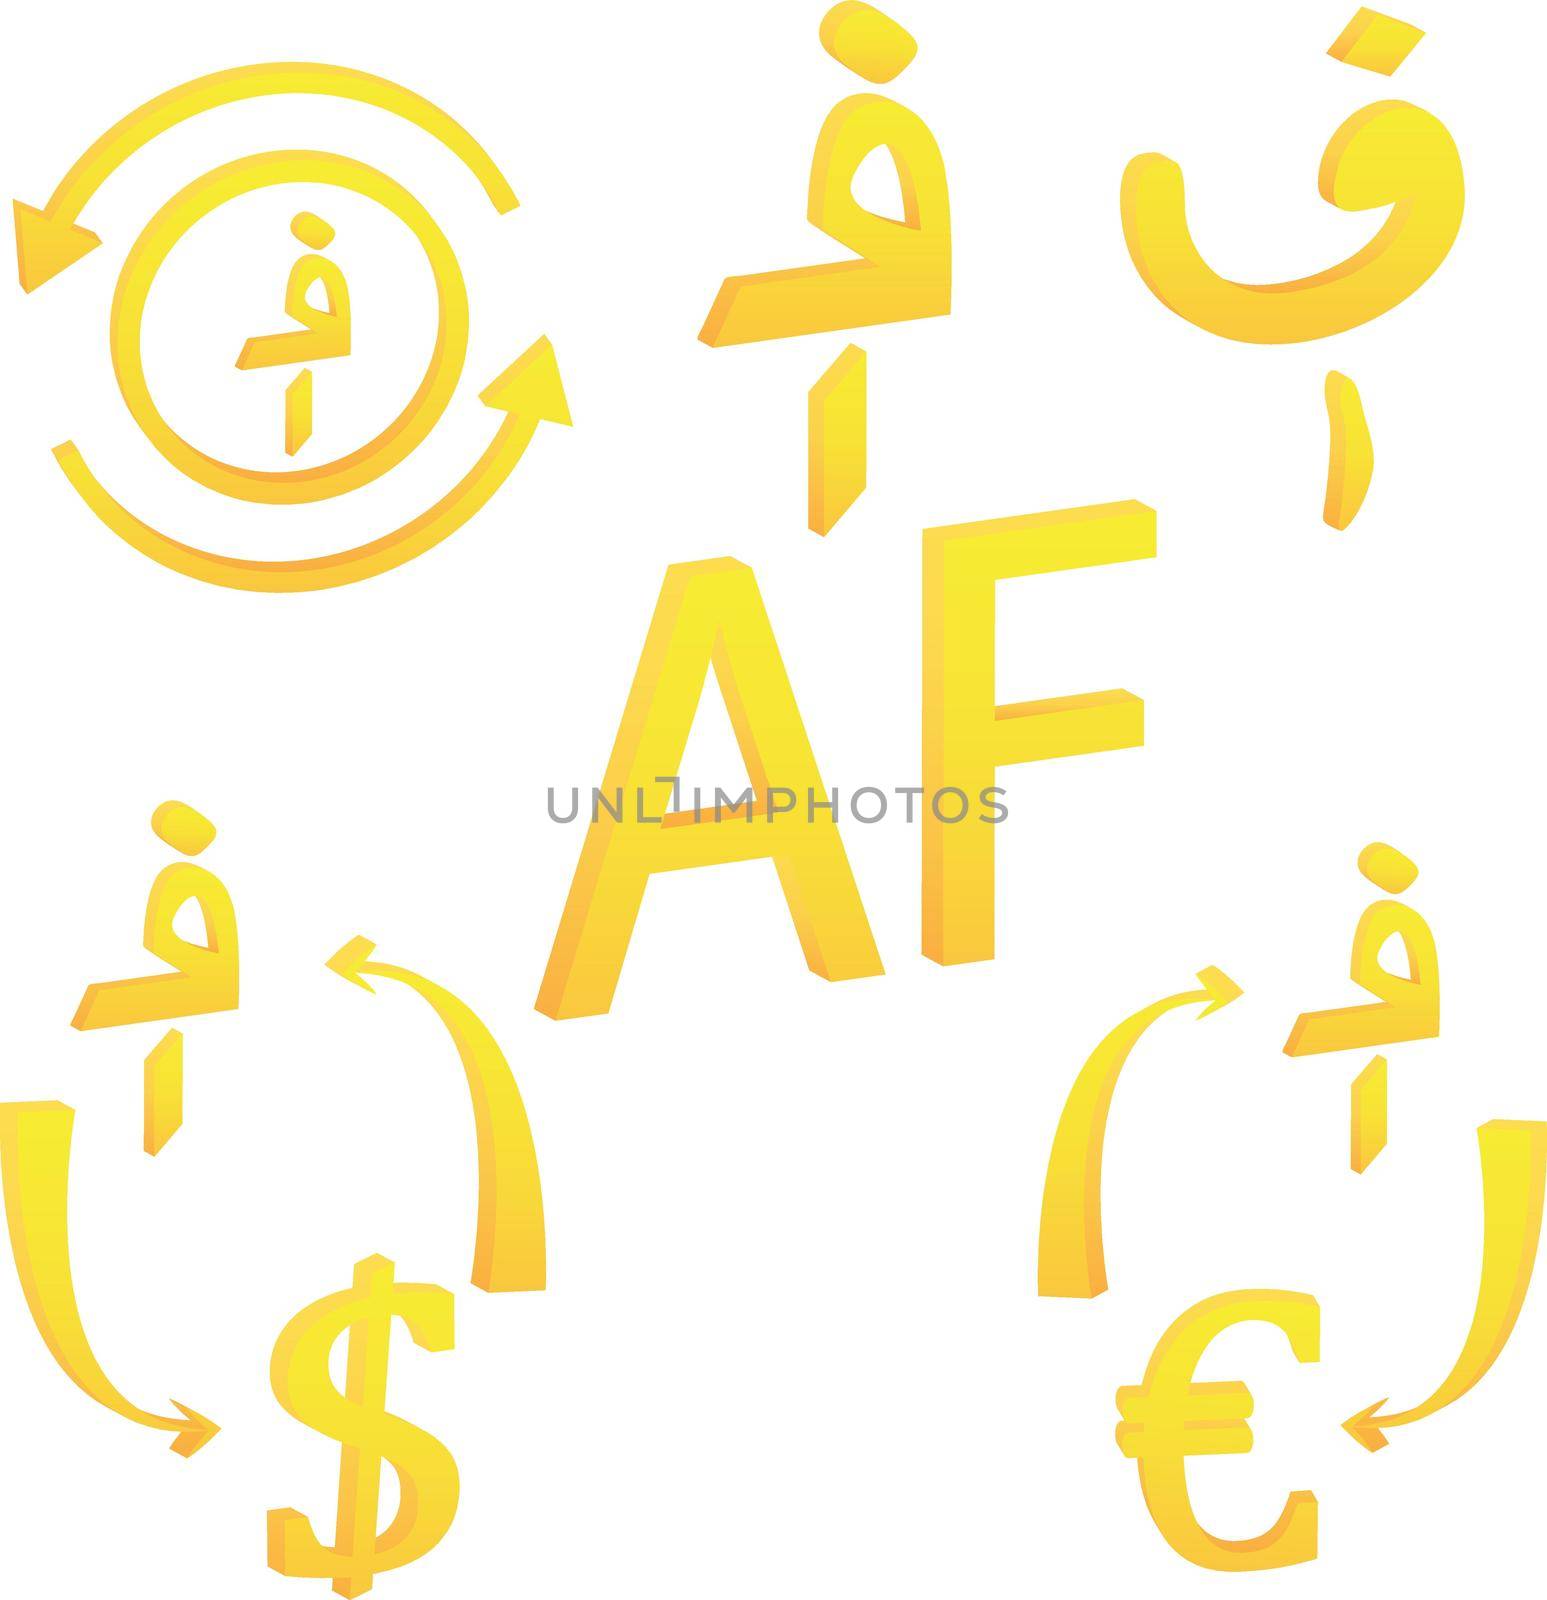 Afghan Afghani of Afghanistan currency symbol icon vector illustration on a white background